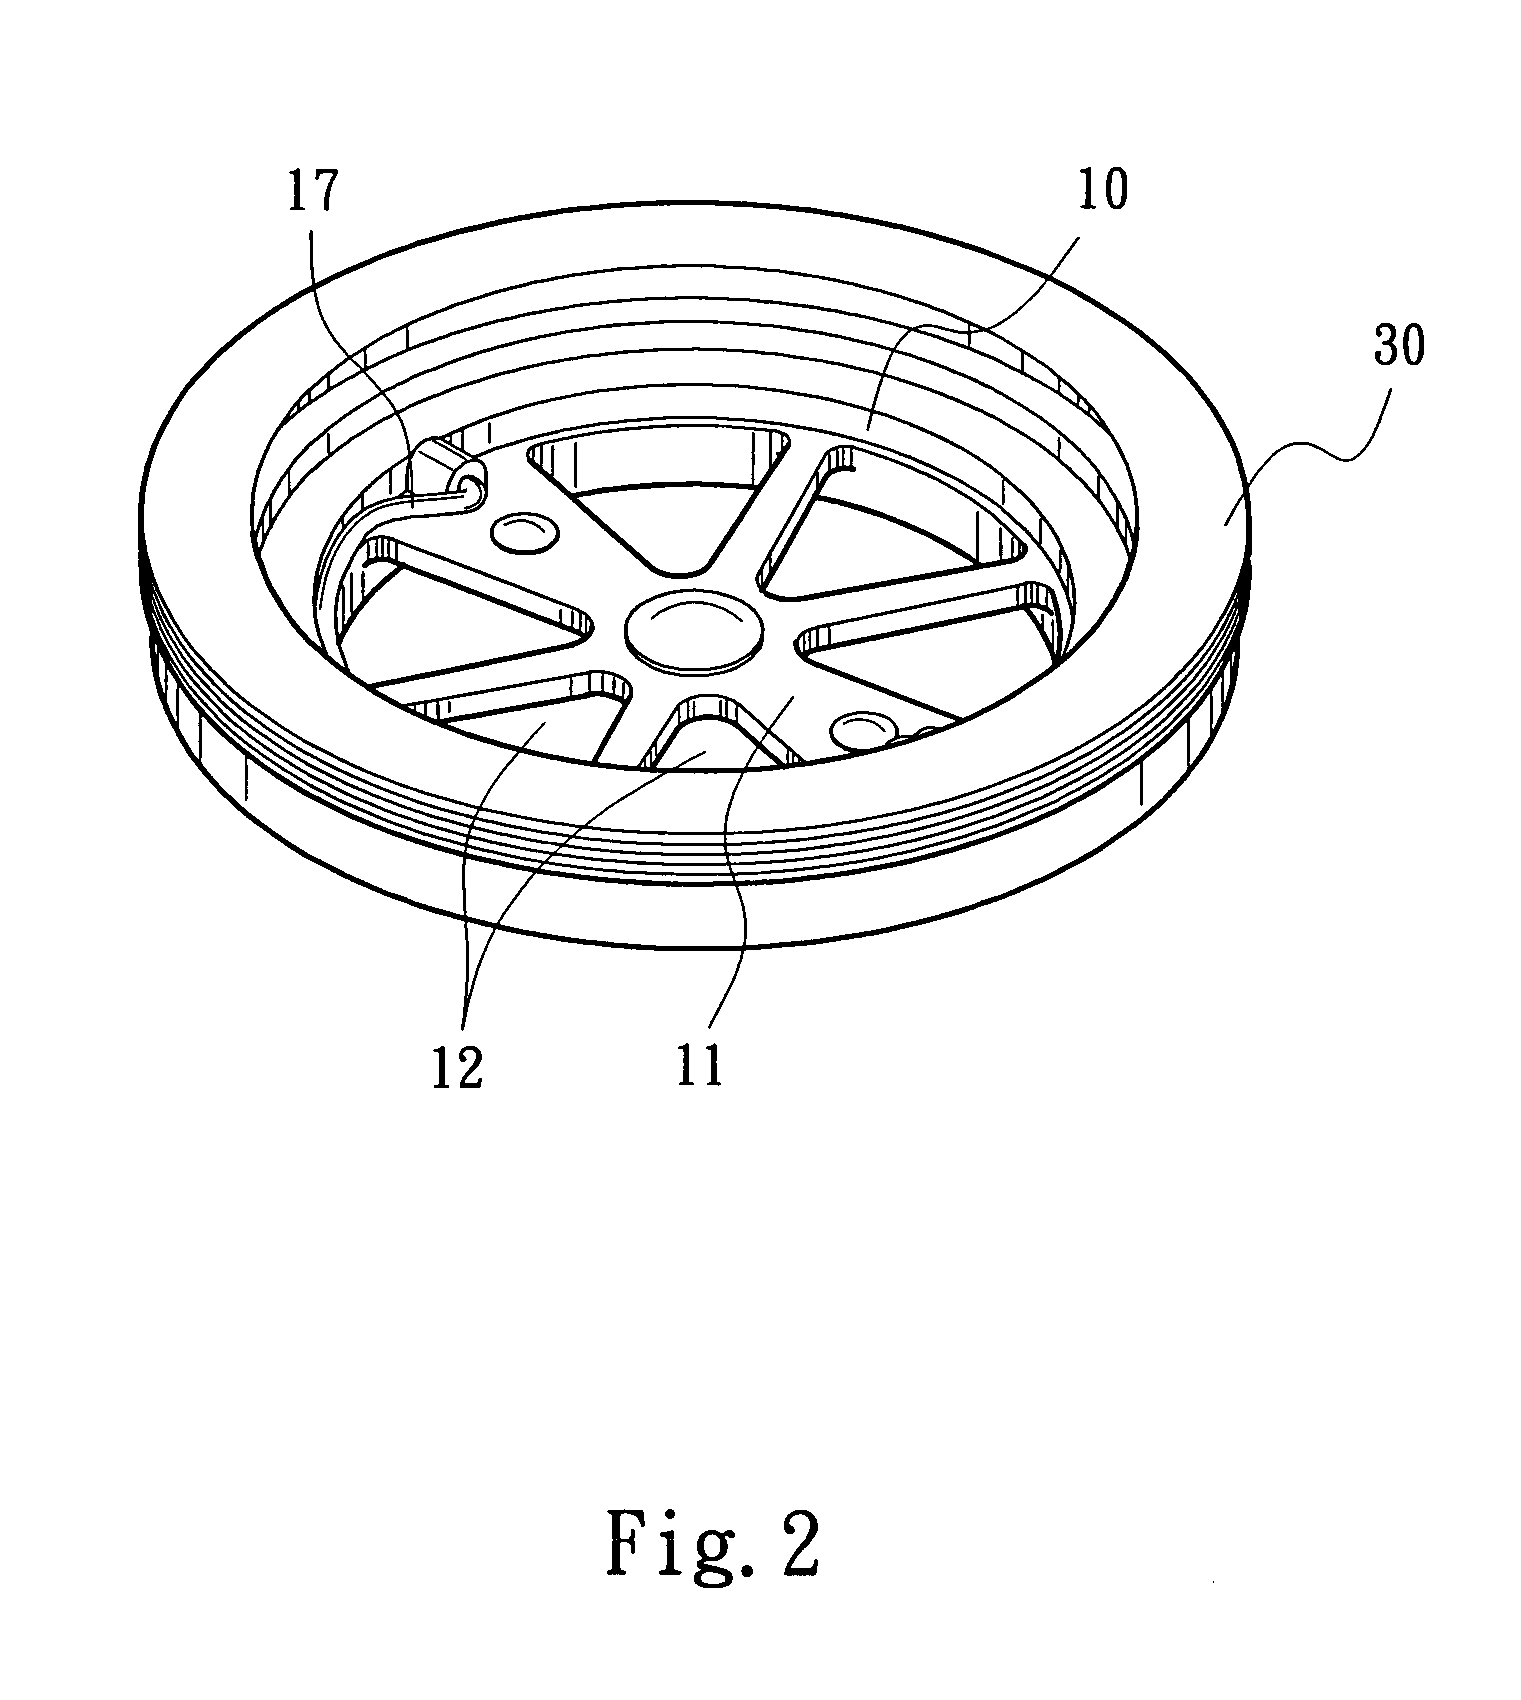 Bugproof and odorproof sealing ring structure of a sinkhole screen